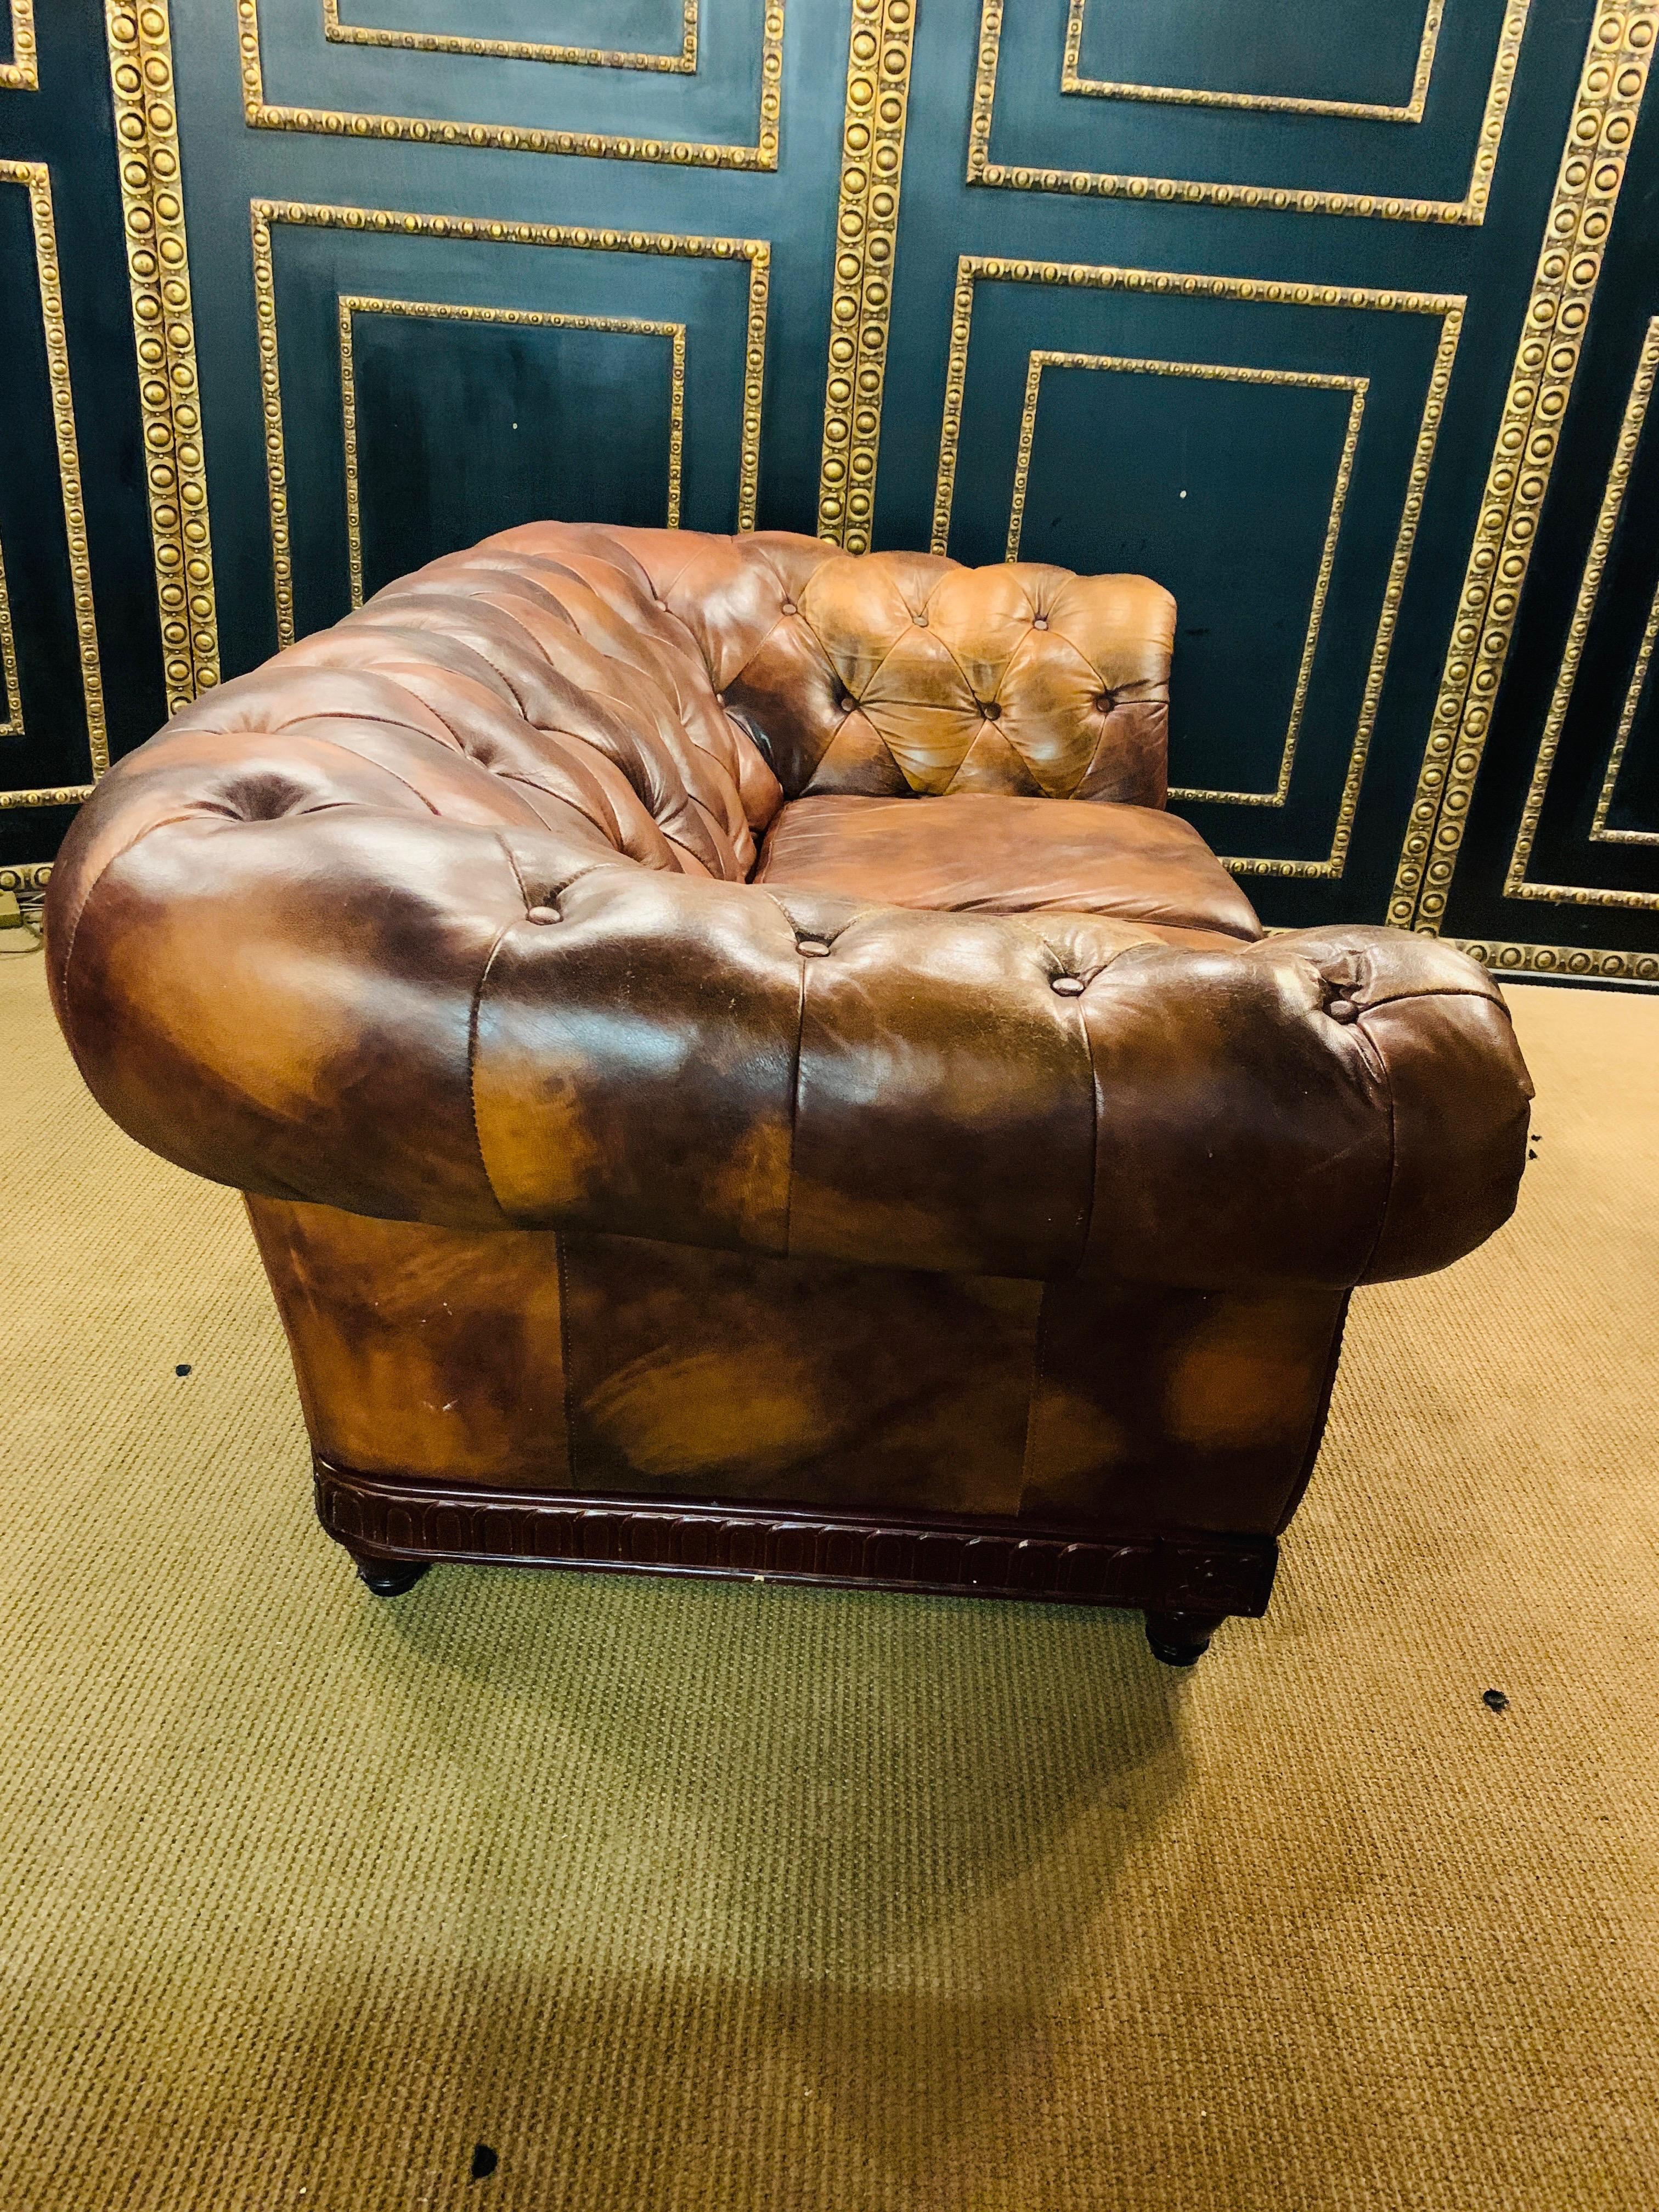 Rare and Unusual Vintage Chesterfield Sofa in Cow Pattern Leather and Wood Frame For Sale 6